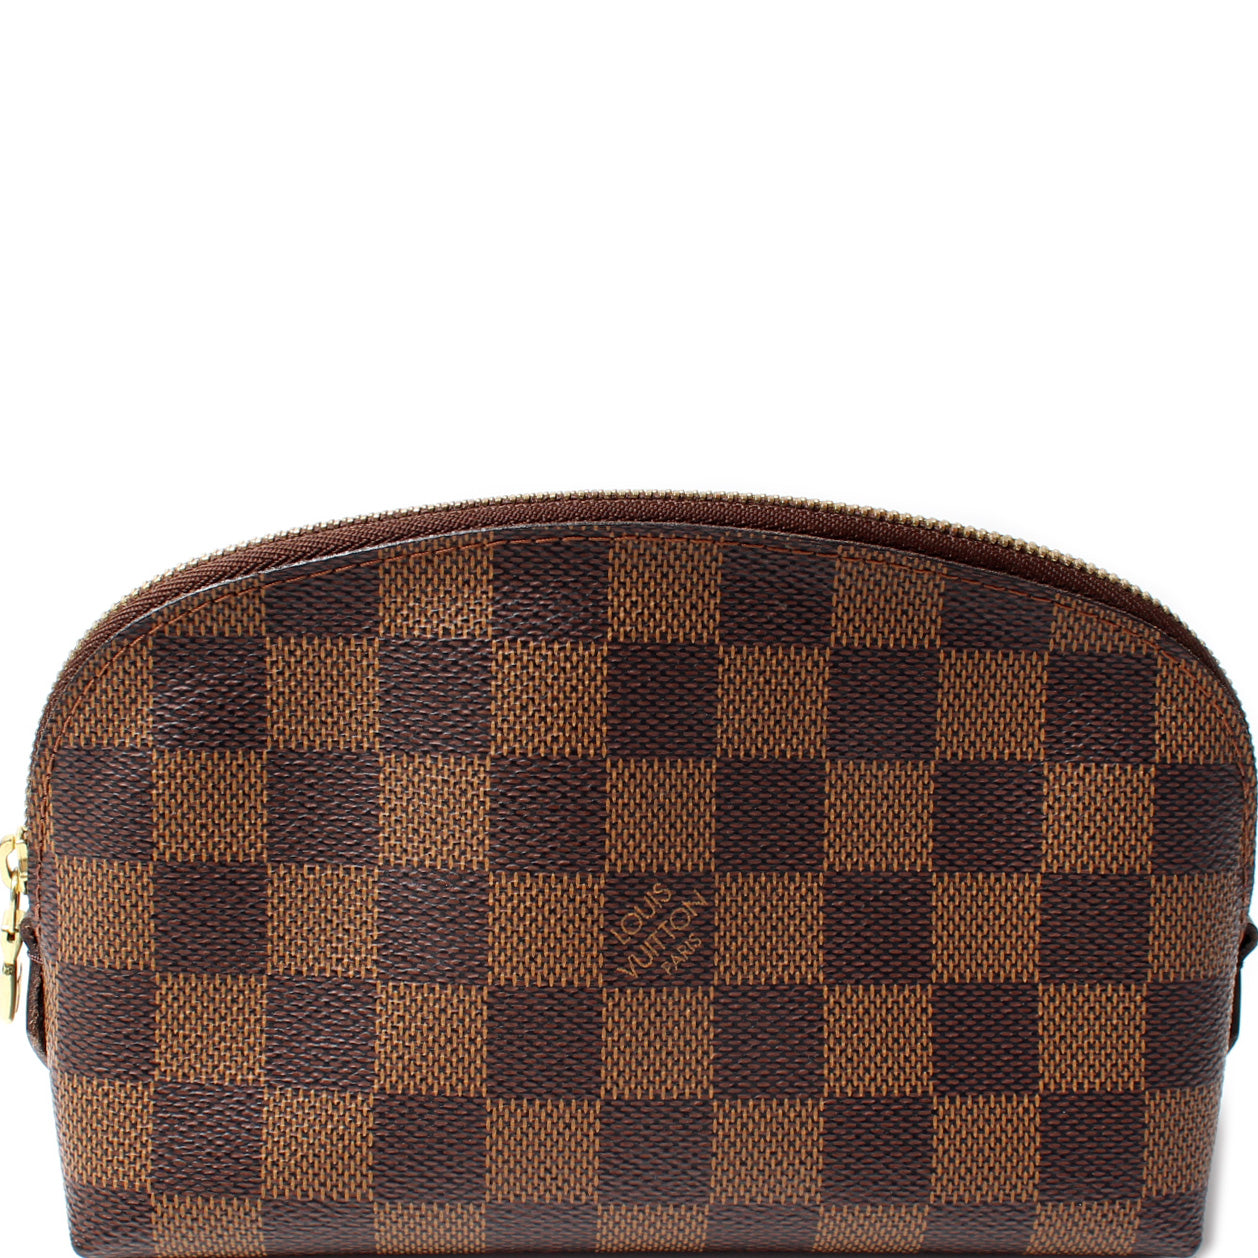 Cosmetic Pouch Damier Ebene